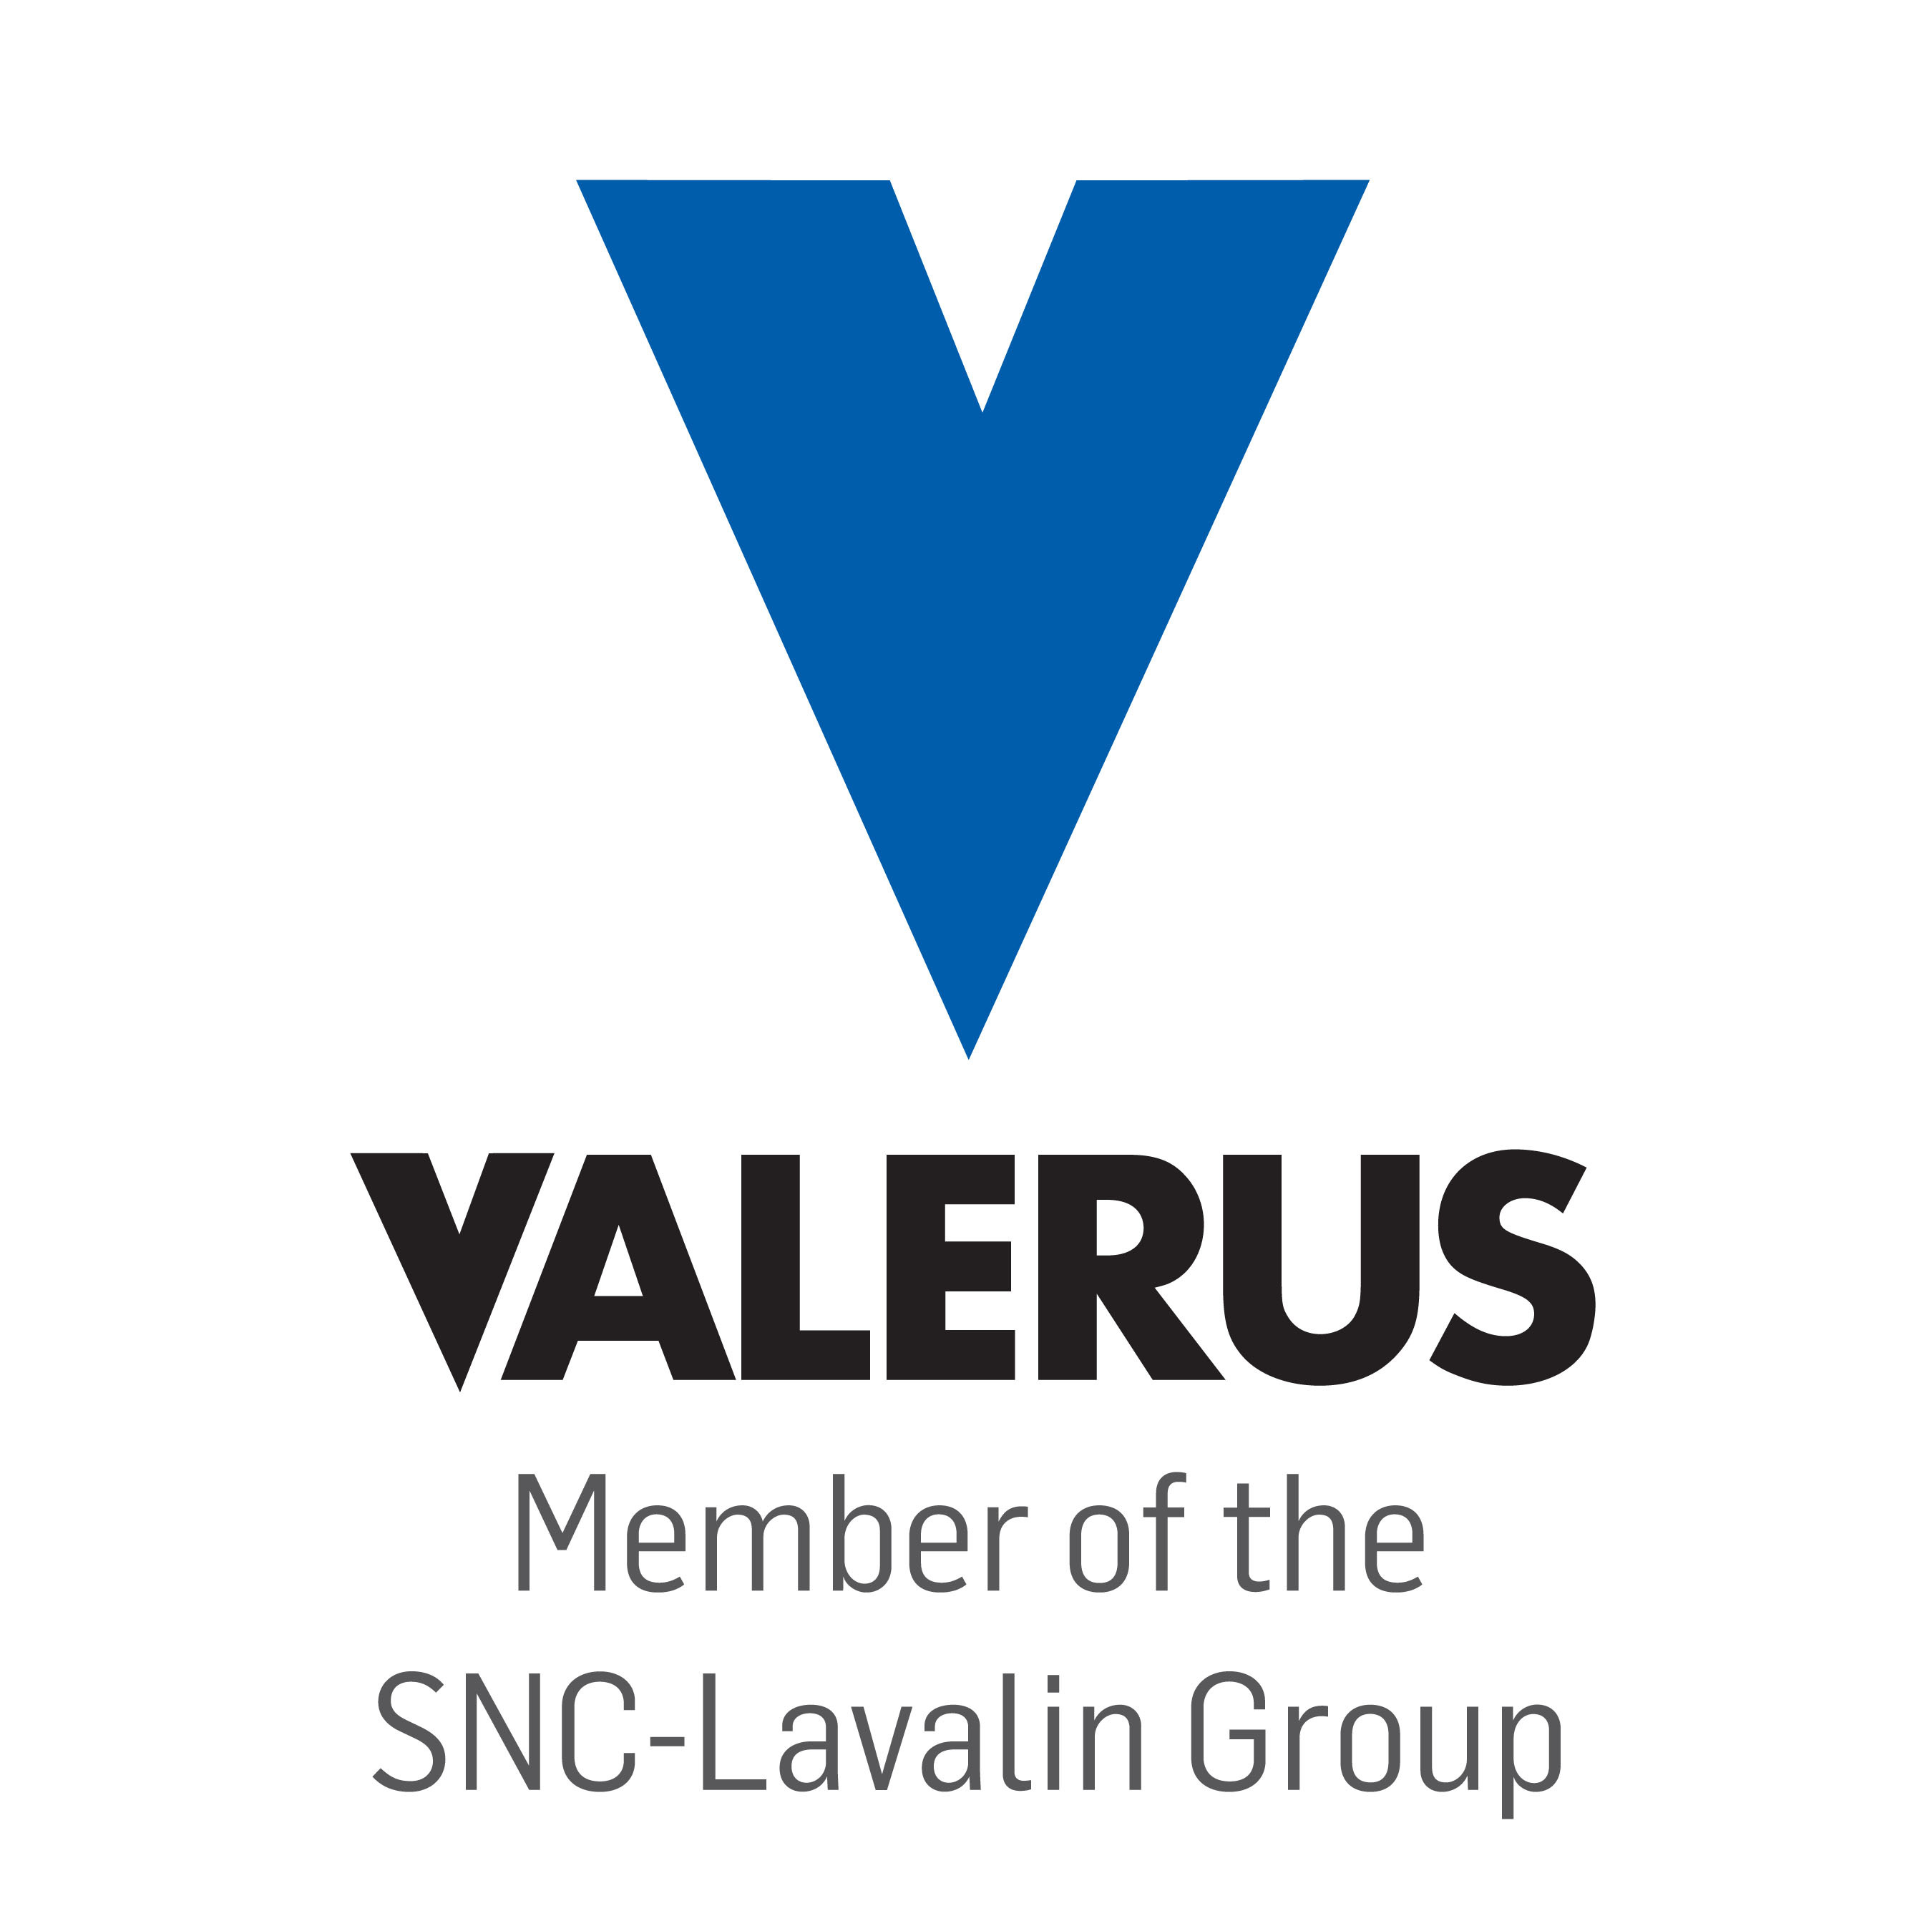 Valerus, a wholly-owned subsidiary of Kentz, is a worldwide leader in integrated oil and gas handling and processing.